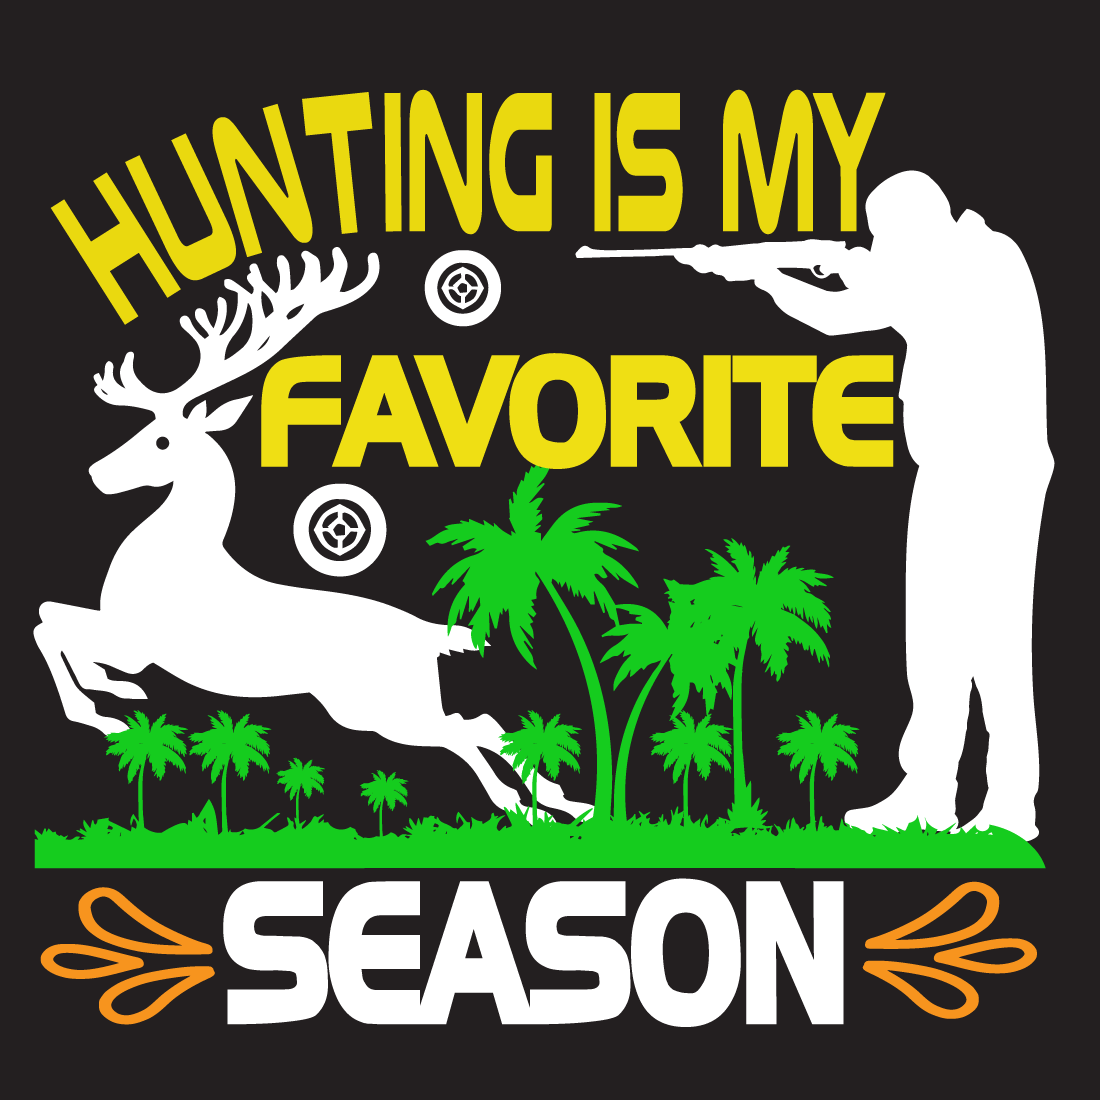 Hunting is my favorite season preview image.